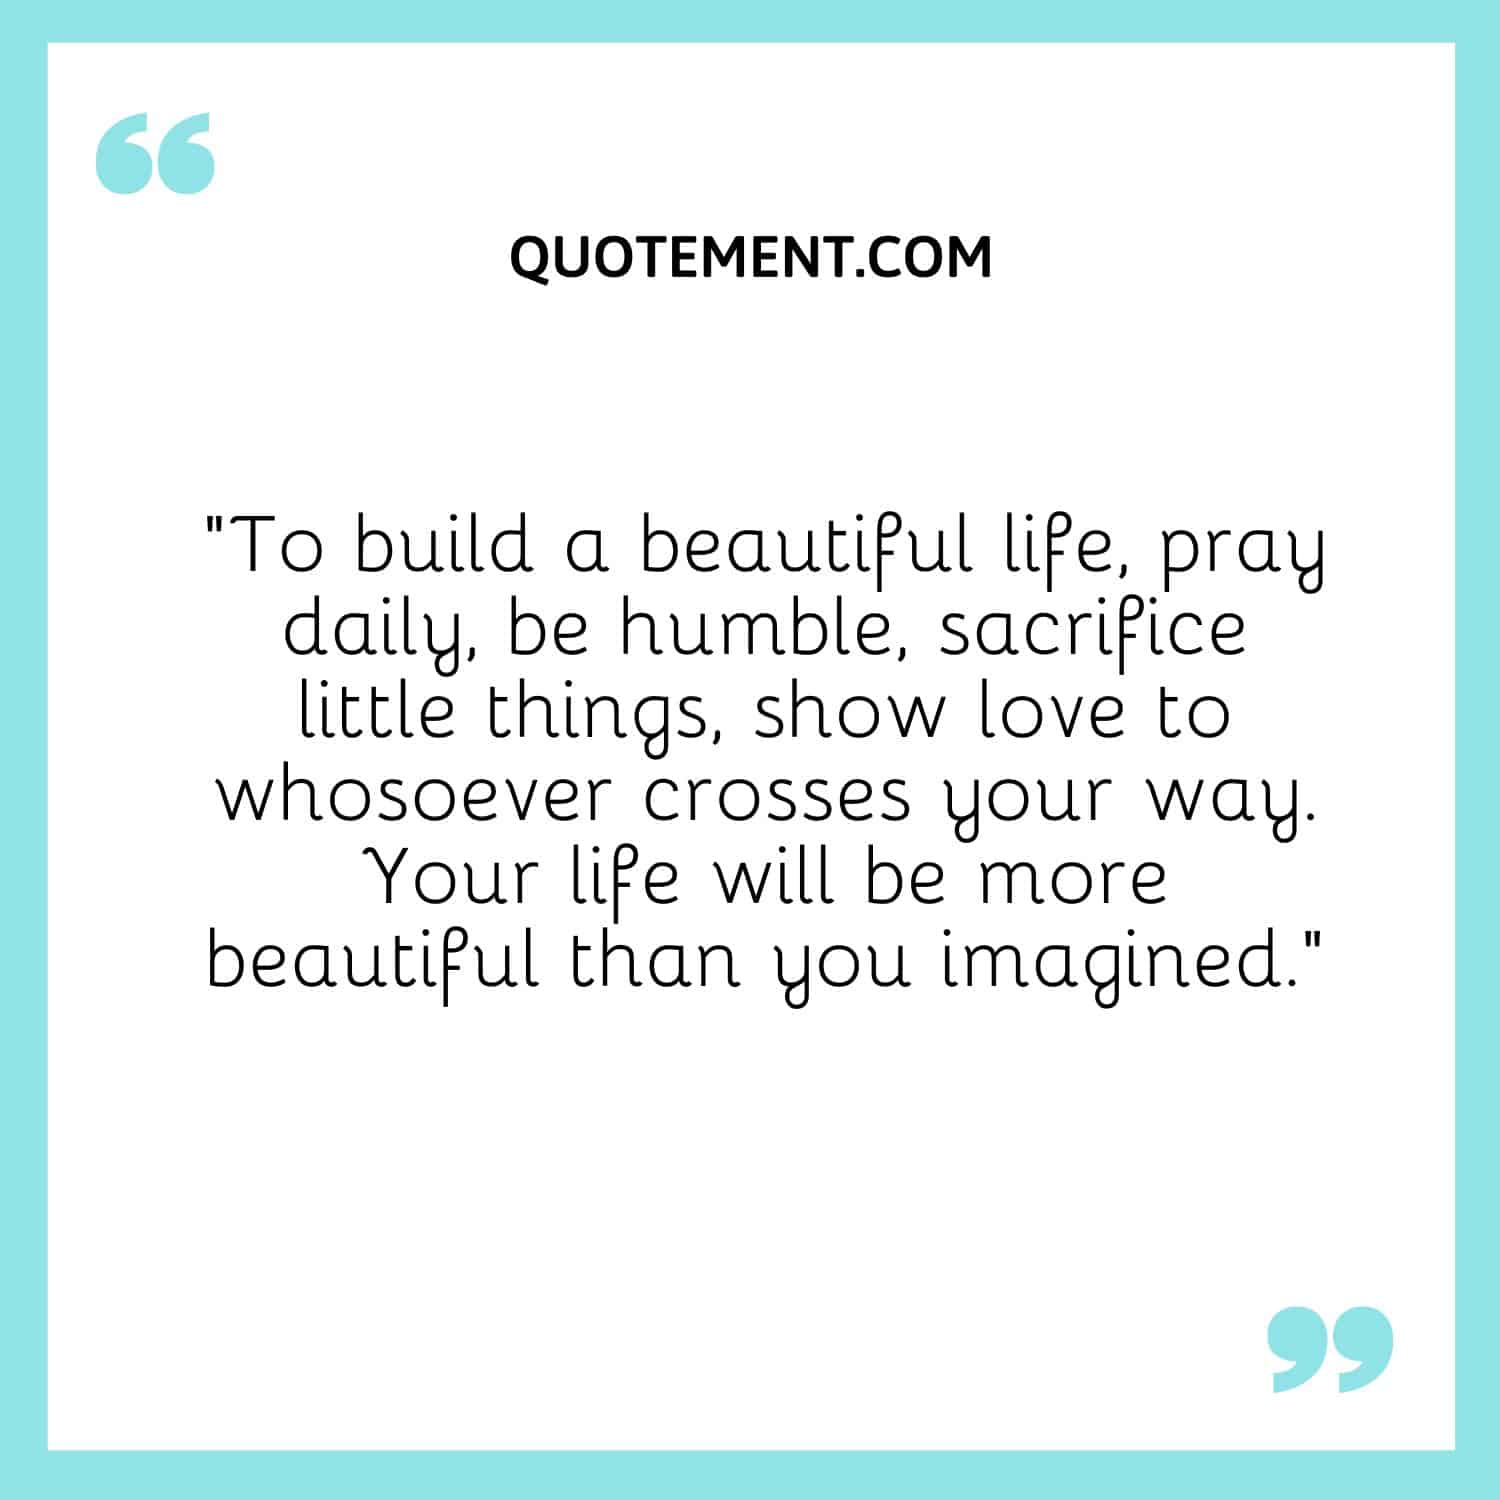 “To build a beautiful life, pray daily, be humble, sacrifice little things, show love to whosoever crosses your way. Your life will be more beautiful than you imagined.”